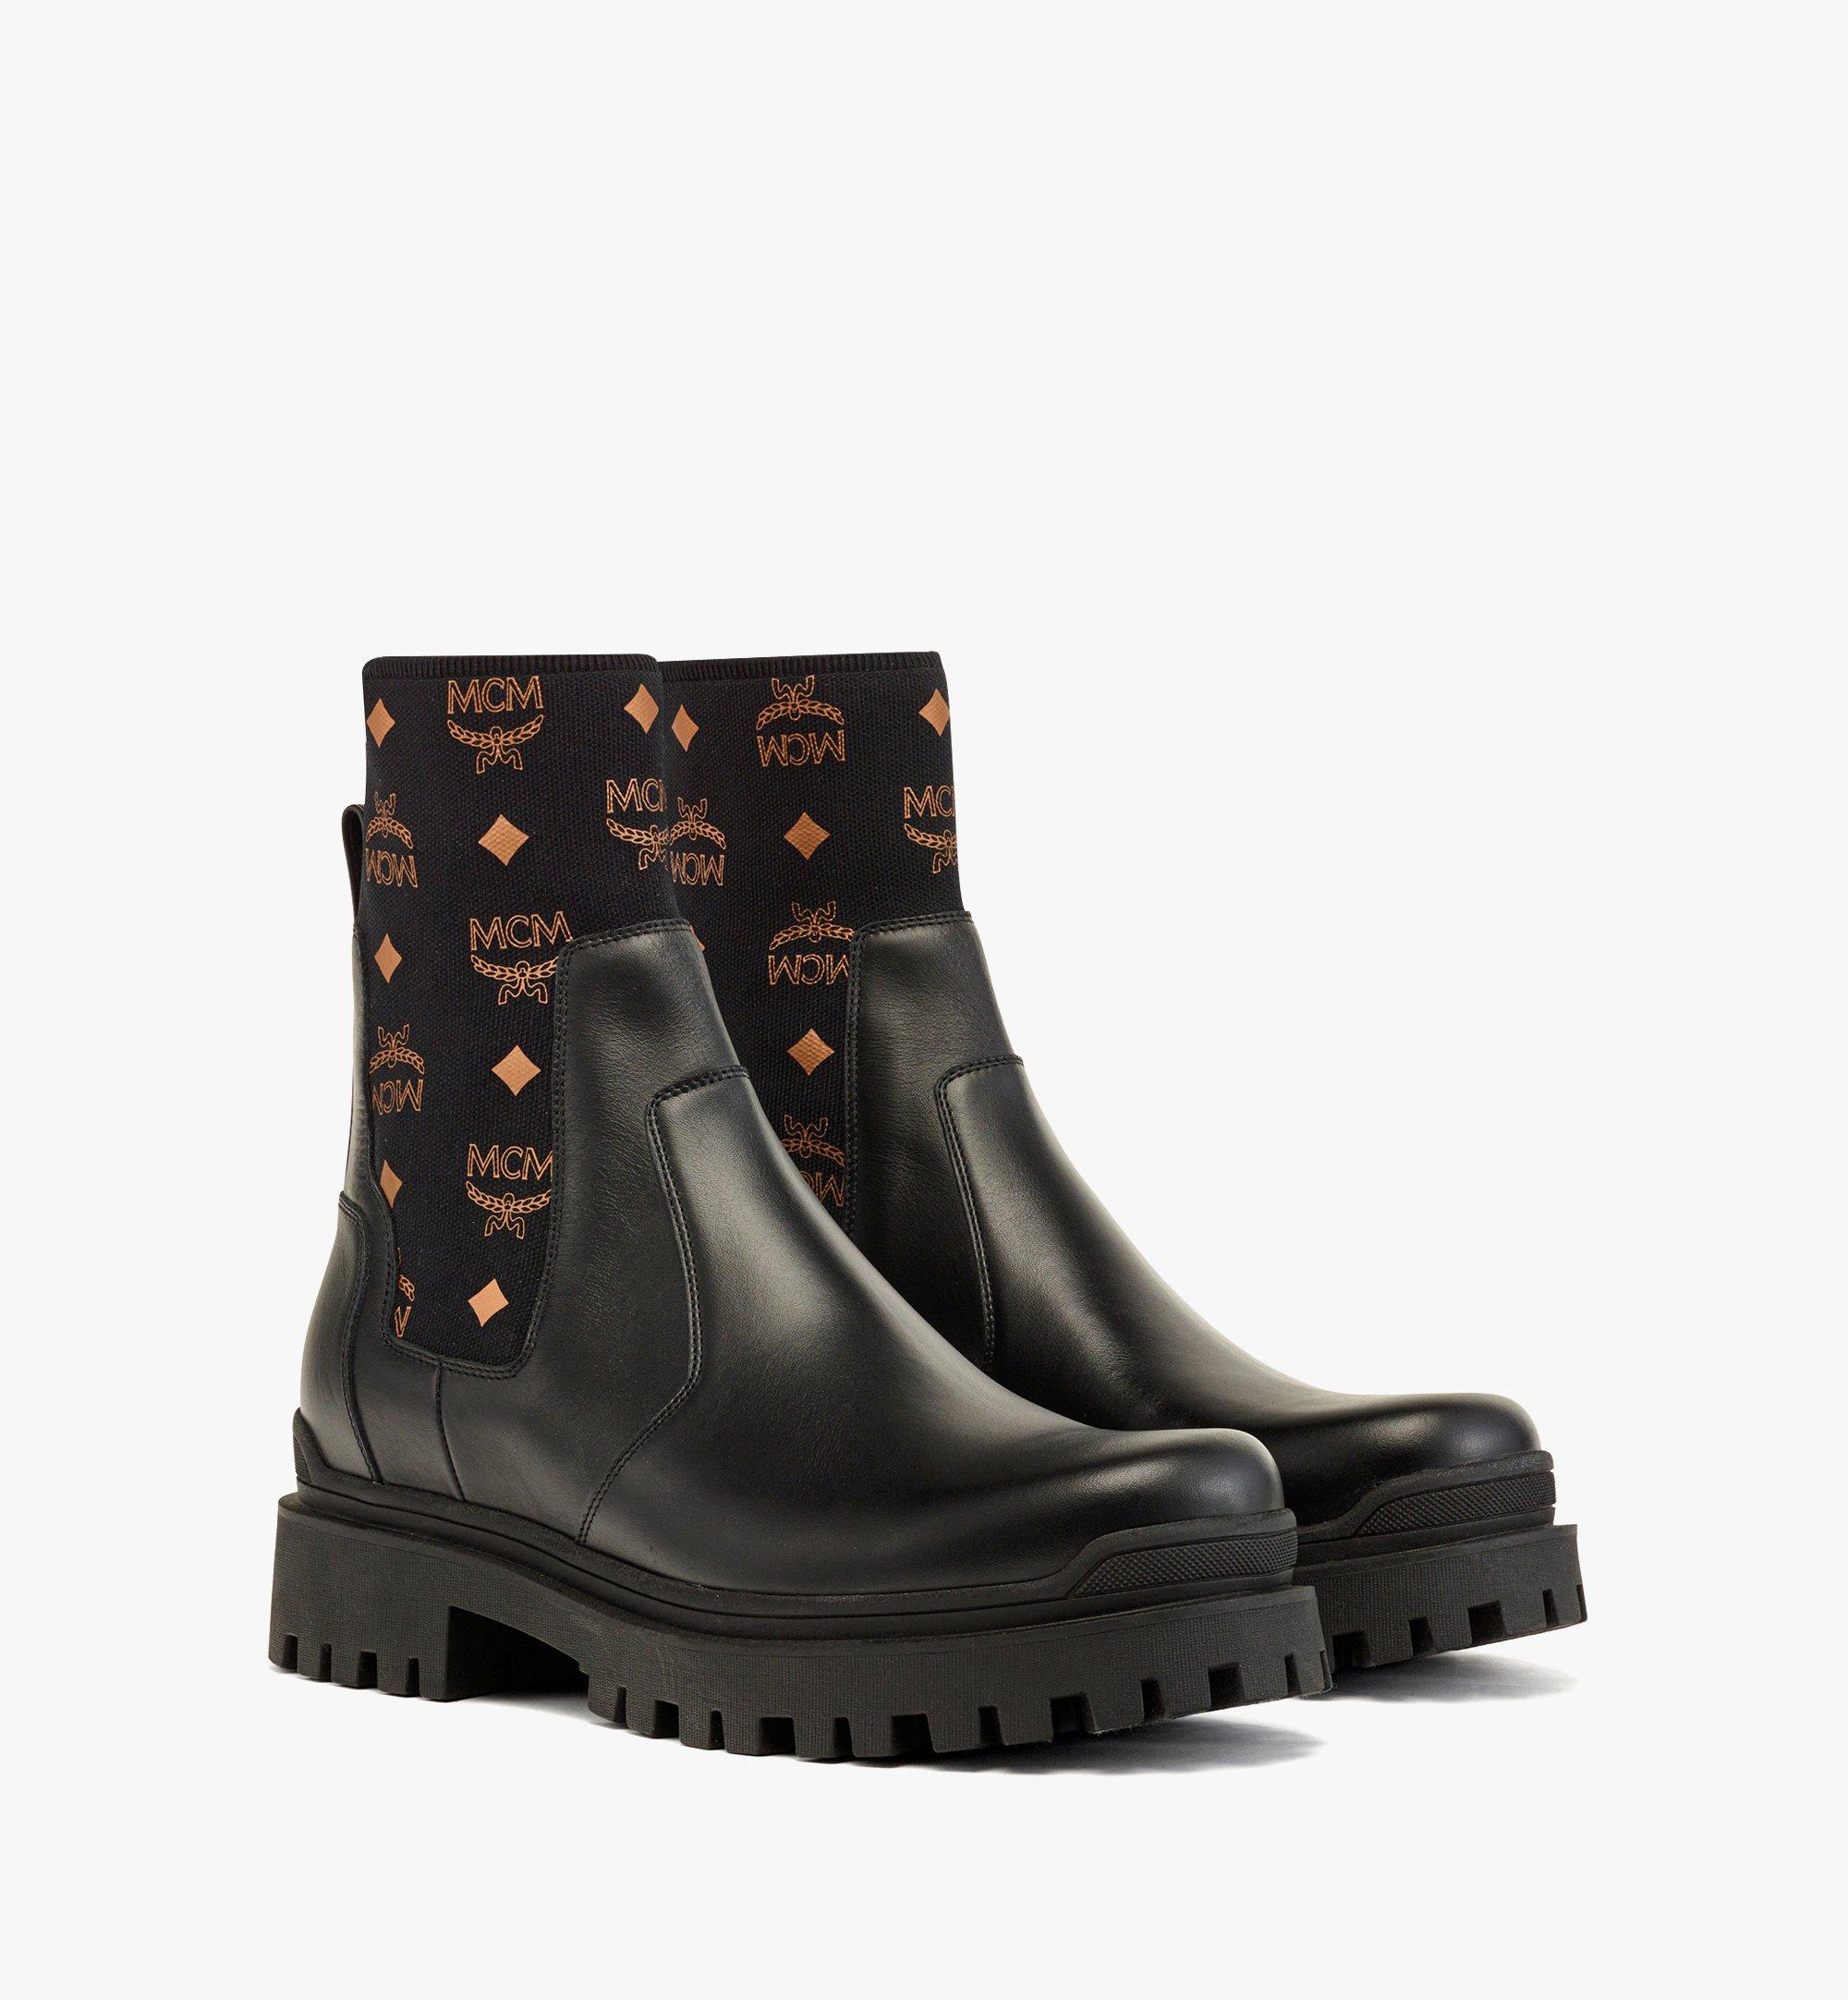 MCM MONOGRAM KNIT BOOTS IN CALF LEATHER